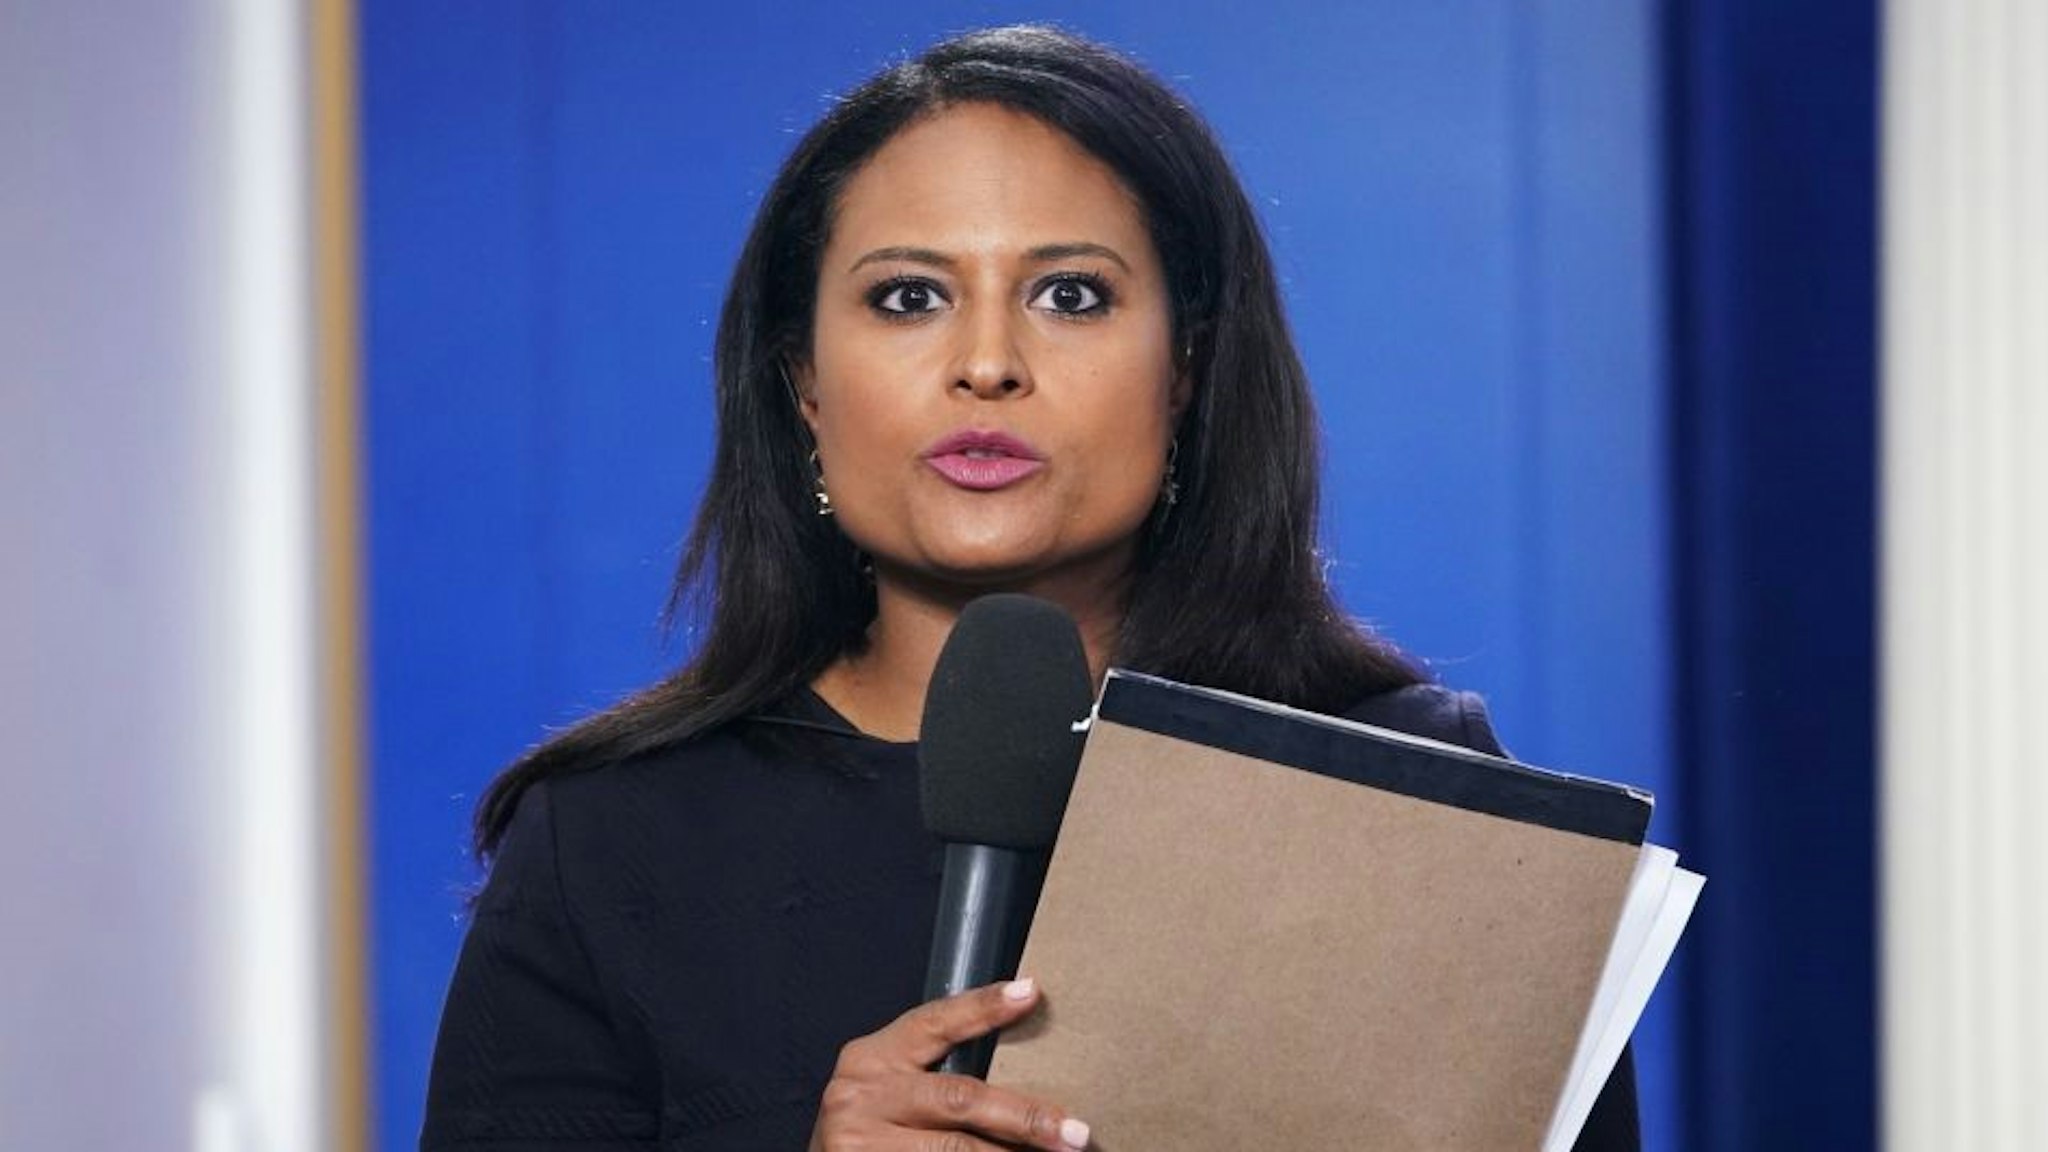 NBC White House correspondent Kristen Welker is seen before a briefing by White House Press Secretary Sarah Sanders in the Brady Briefing Room of the White House in Washington, DC on October 3, 2018. (Photo by MANDEL NGAN / AFP) (Photo by